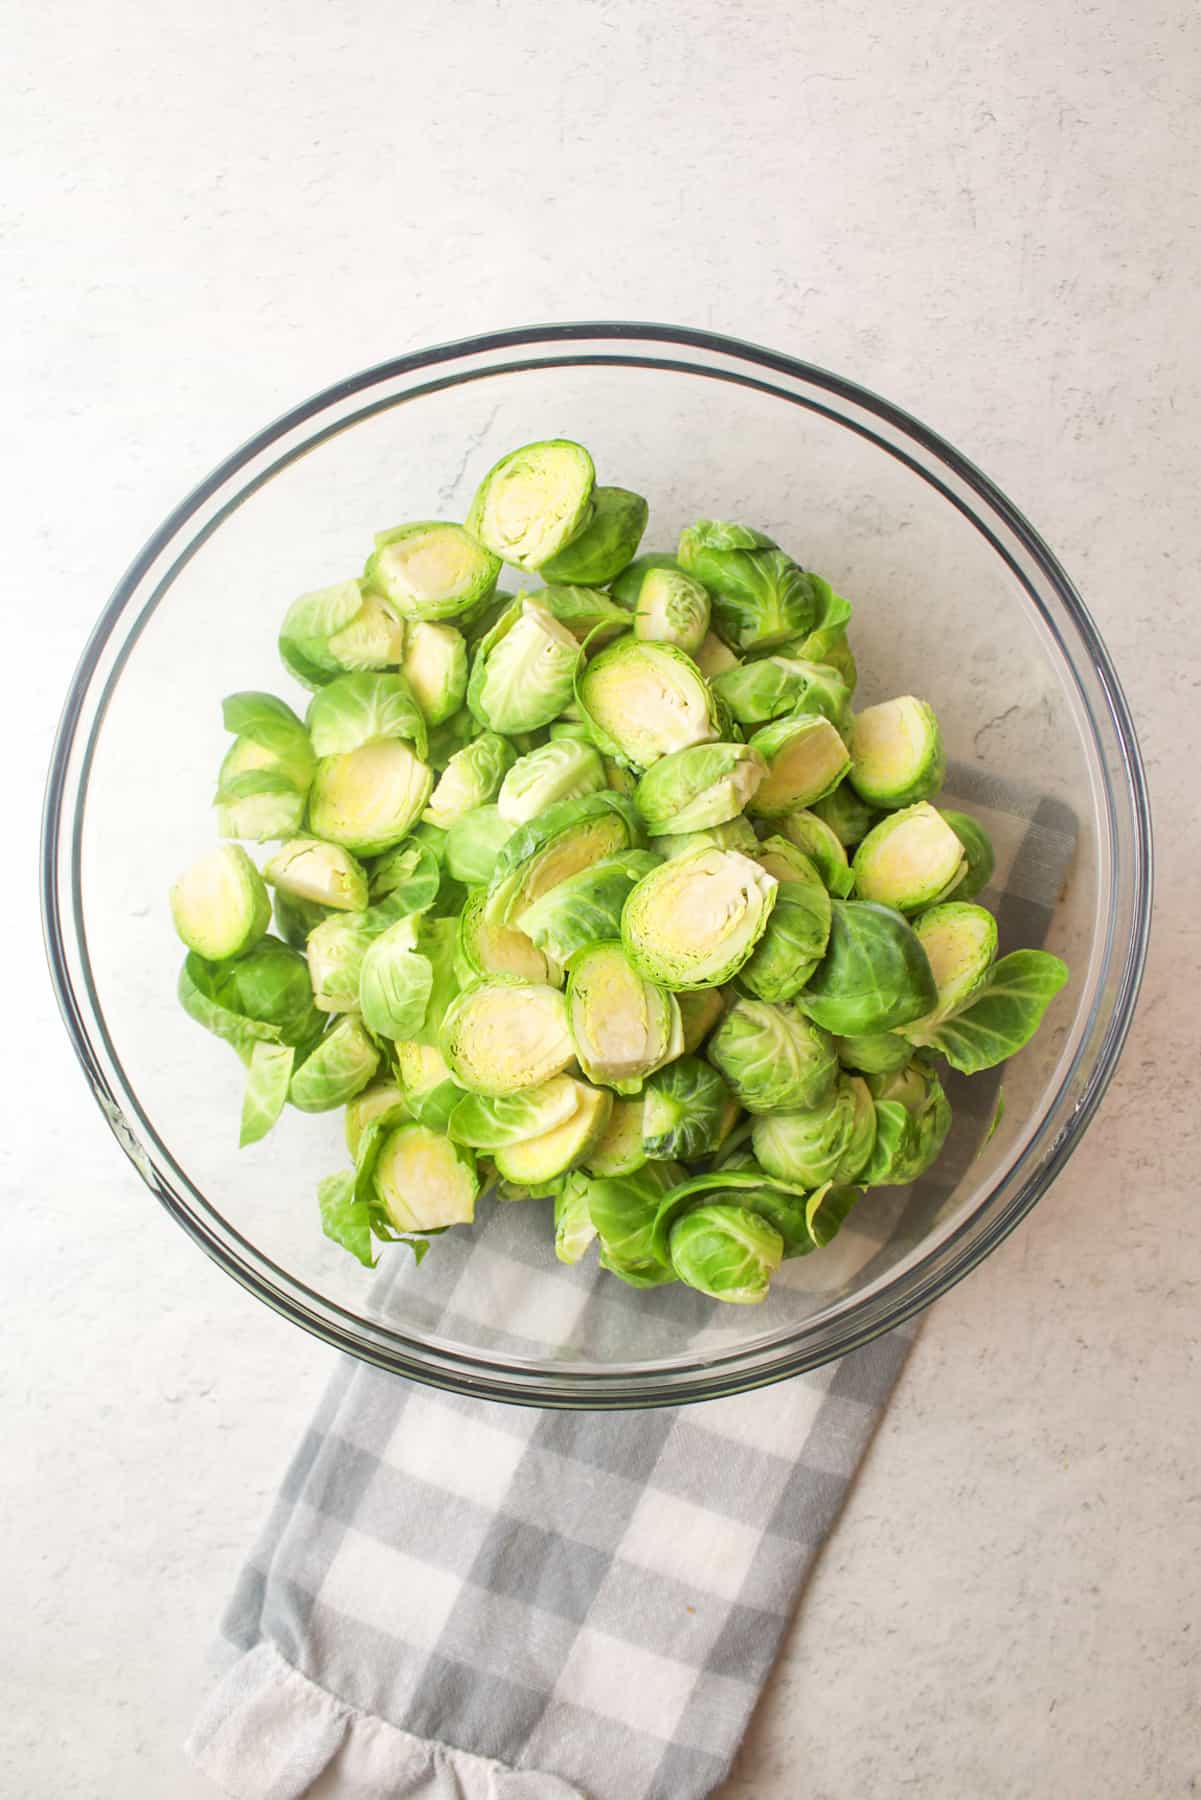 haled brussel sprouts in a glass bowl on a kitchen towel